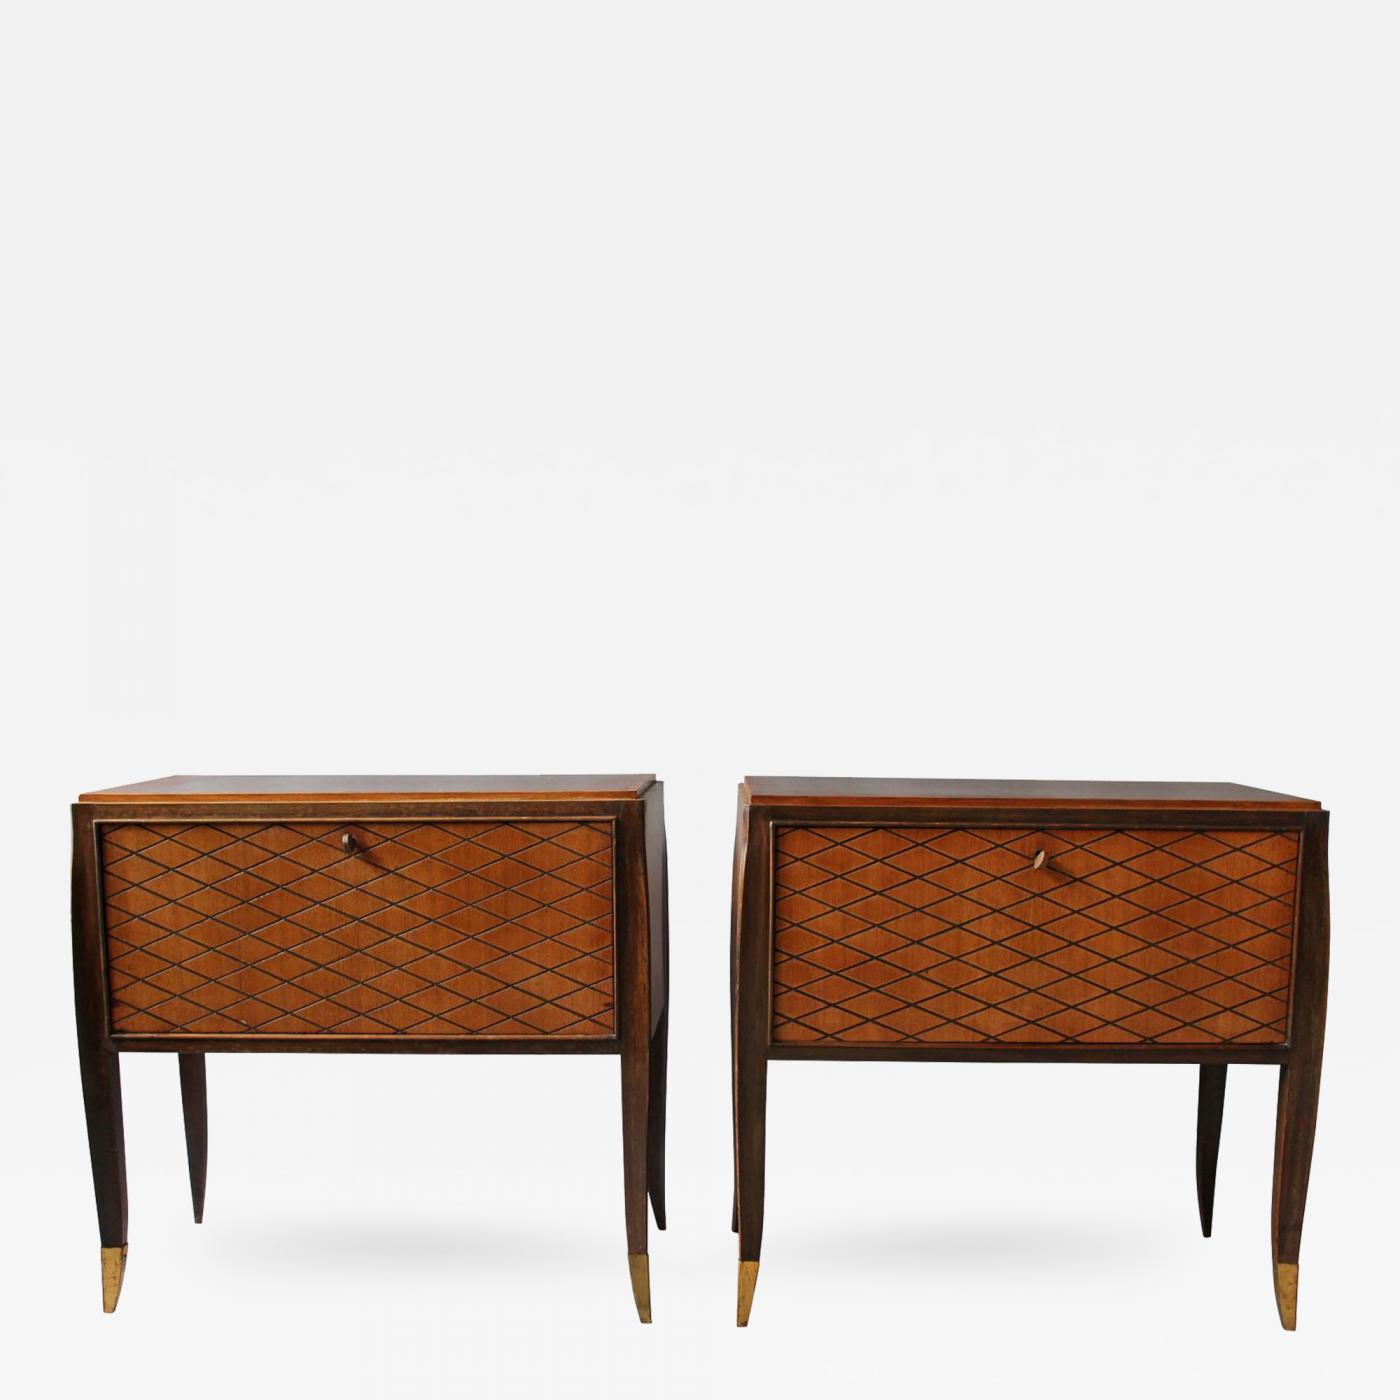 Jean Pascaud - A Pair Fine French Art Cabinets or Commodes by Jean Pascaud